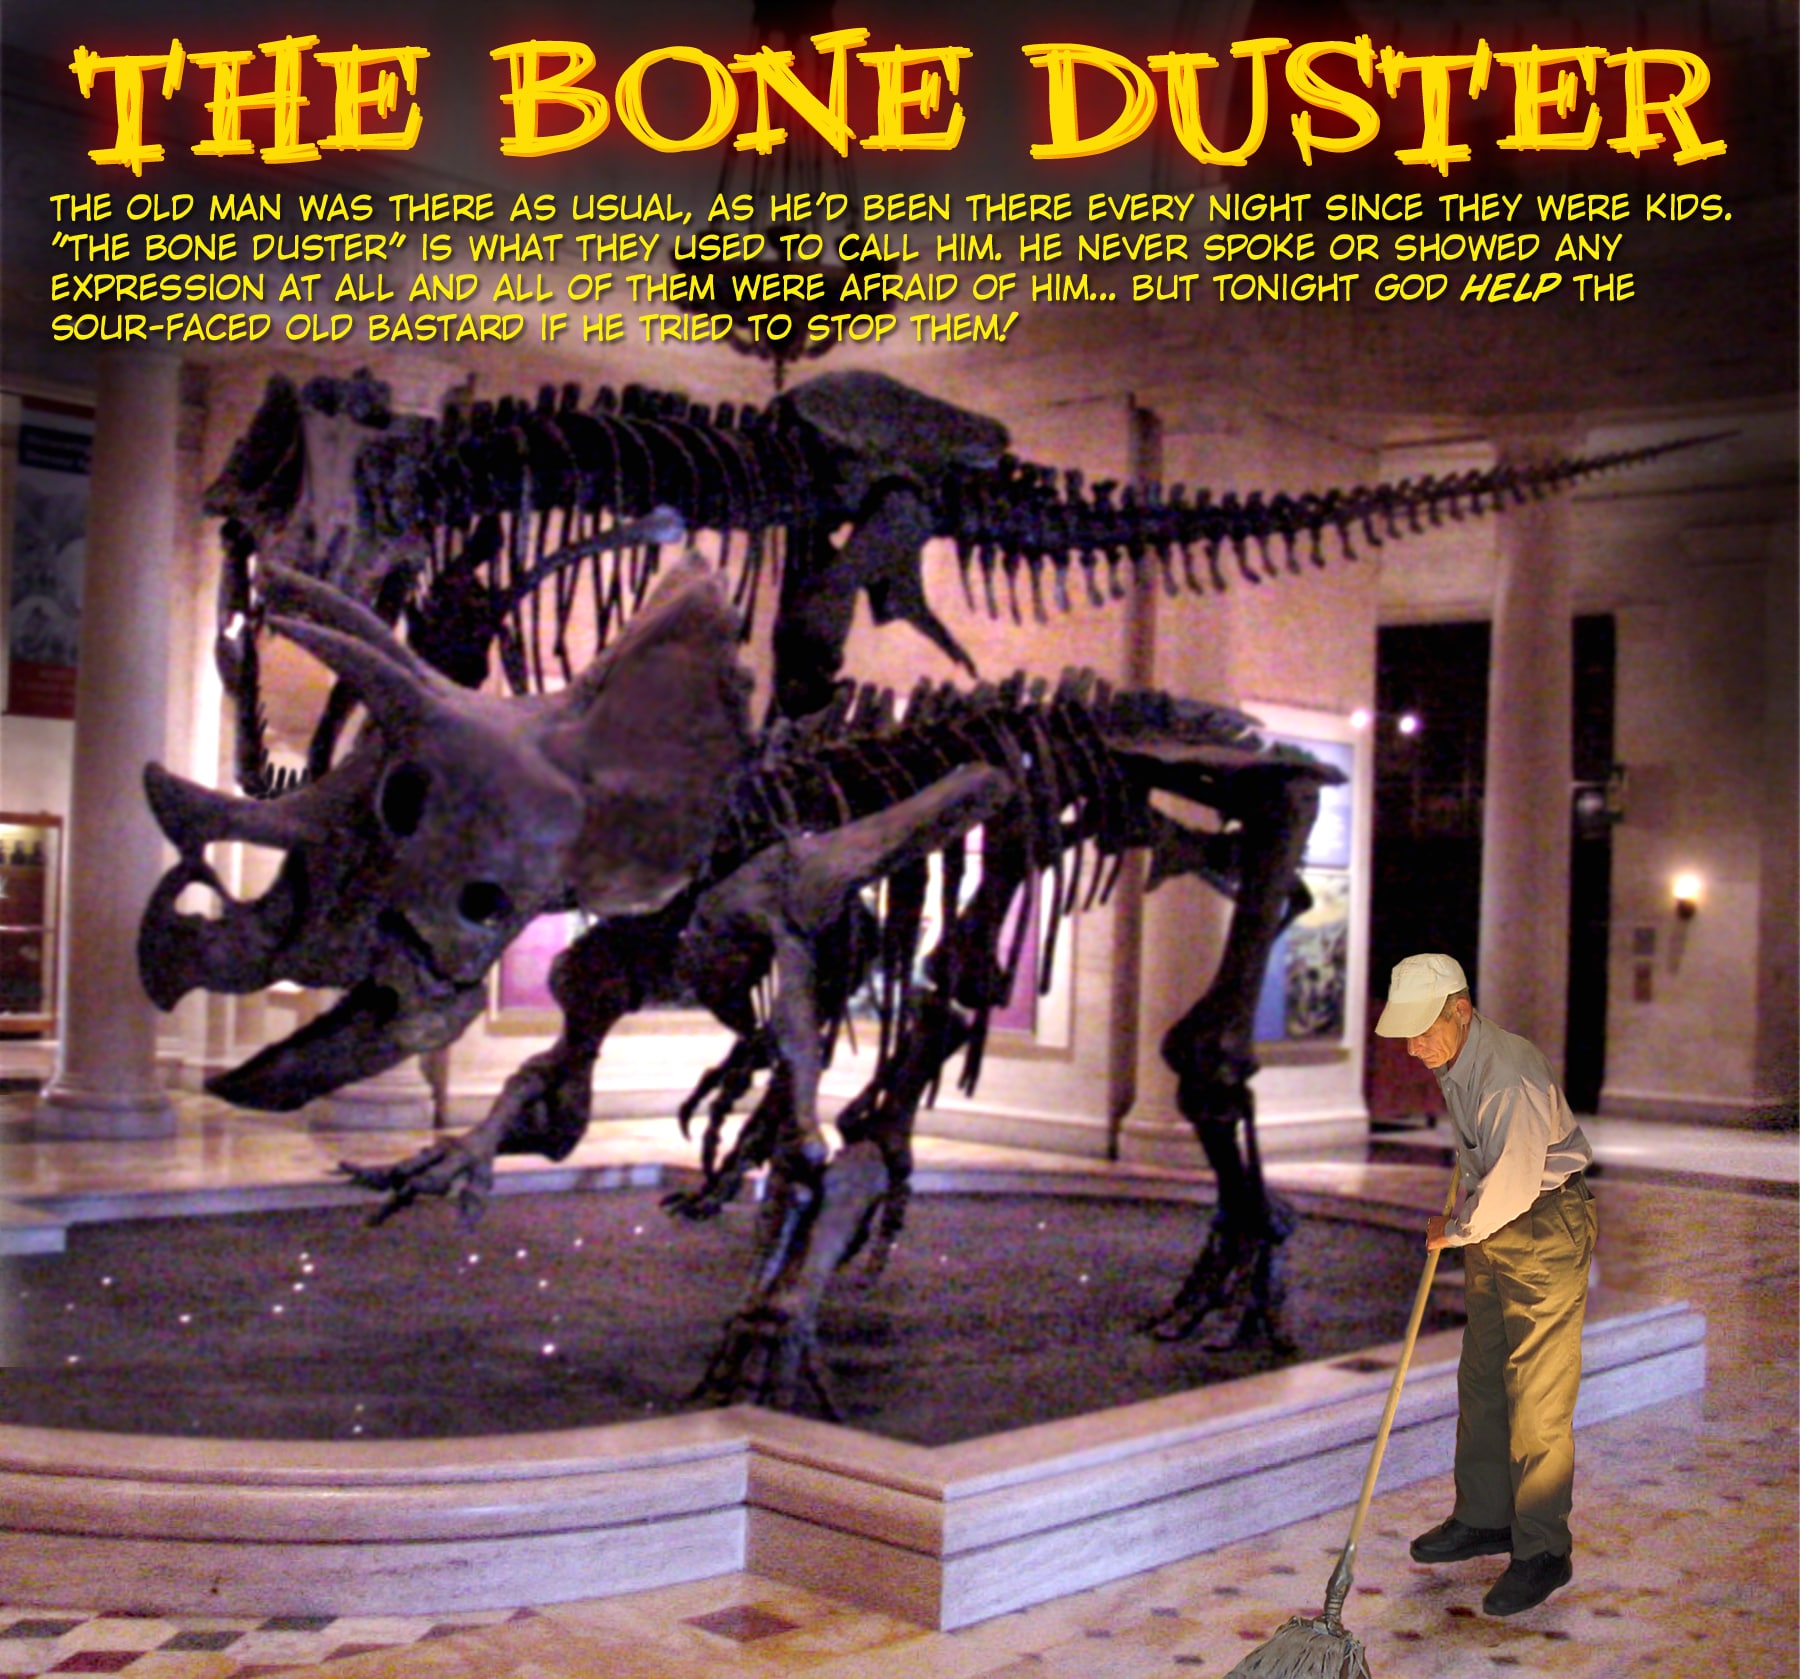 The Bone Duster by Pete Von Sholly